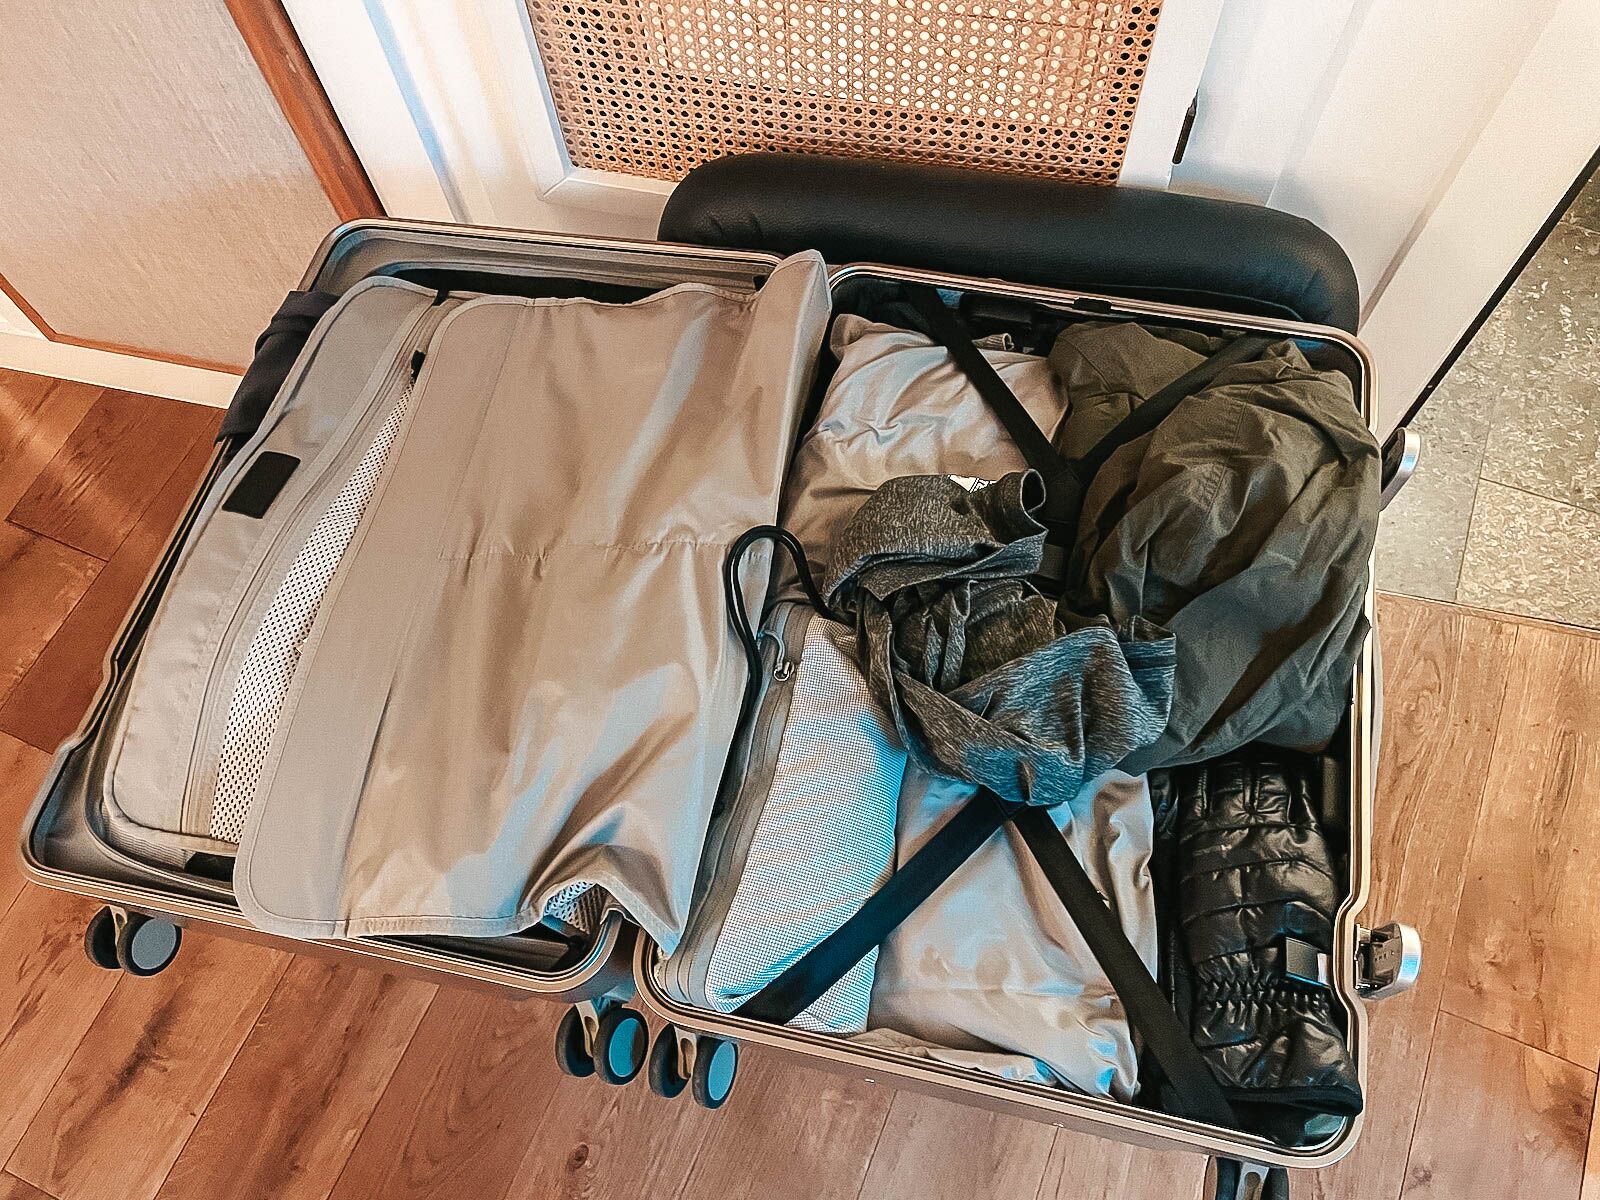 Mono luggage - carry-on hybrid medium open with gear inside